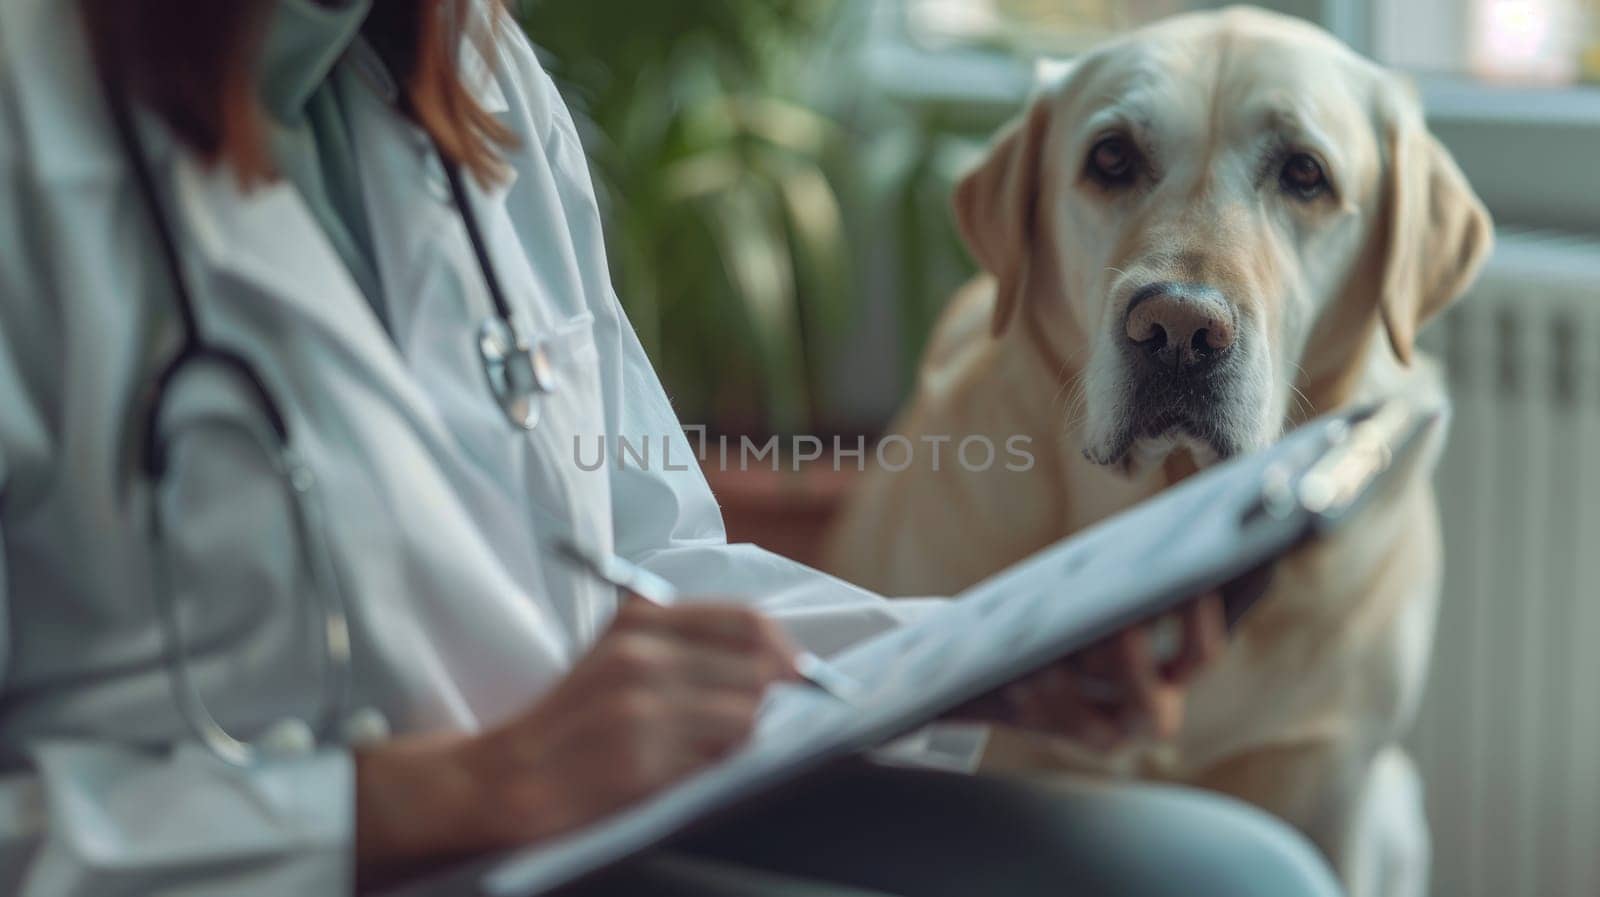 Veterinarian with a dog, Pet care, Animal pet health checkup, Pet health care and animals concept.